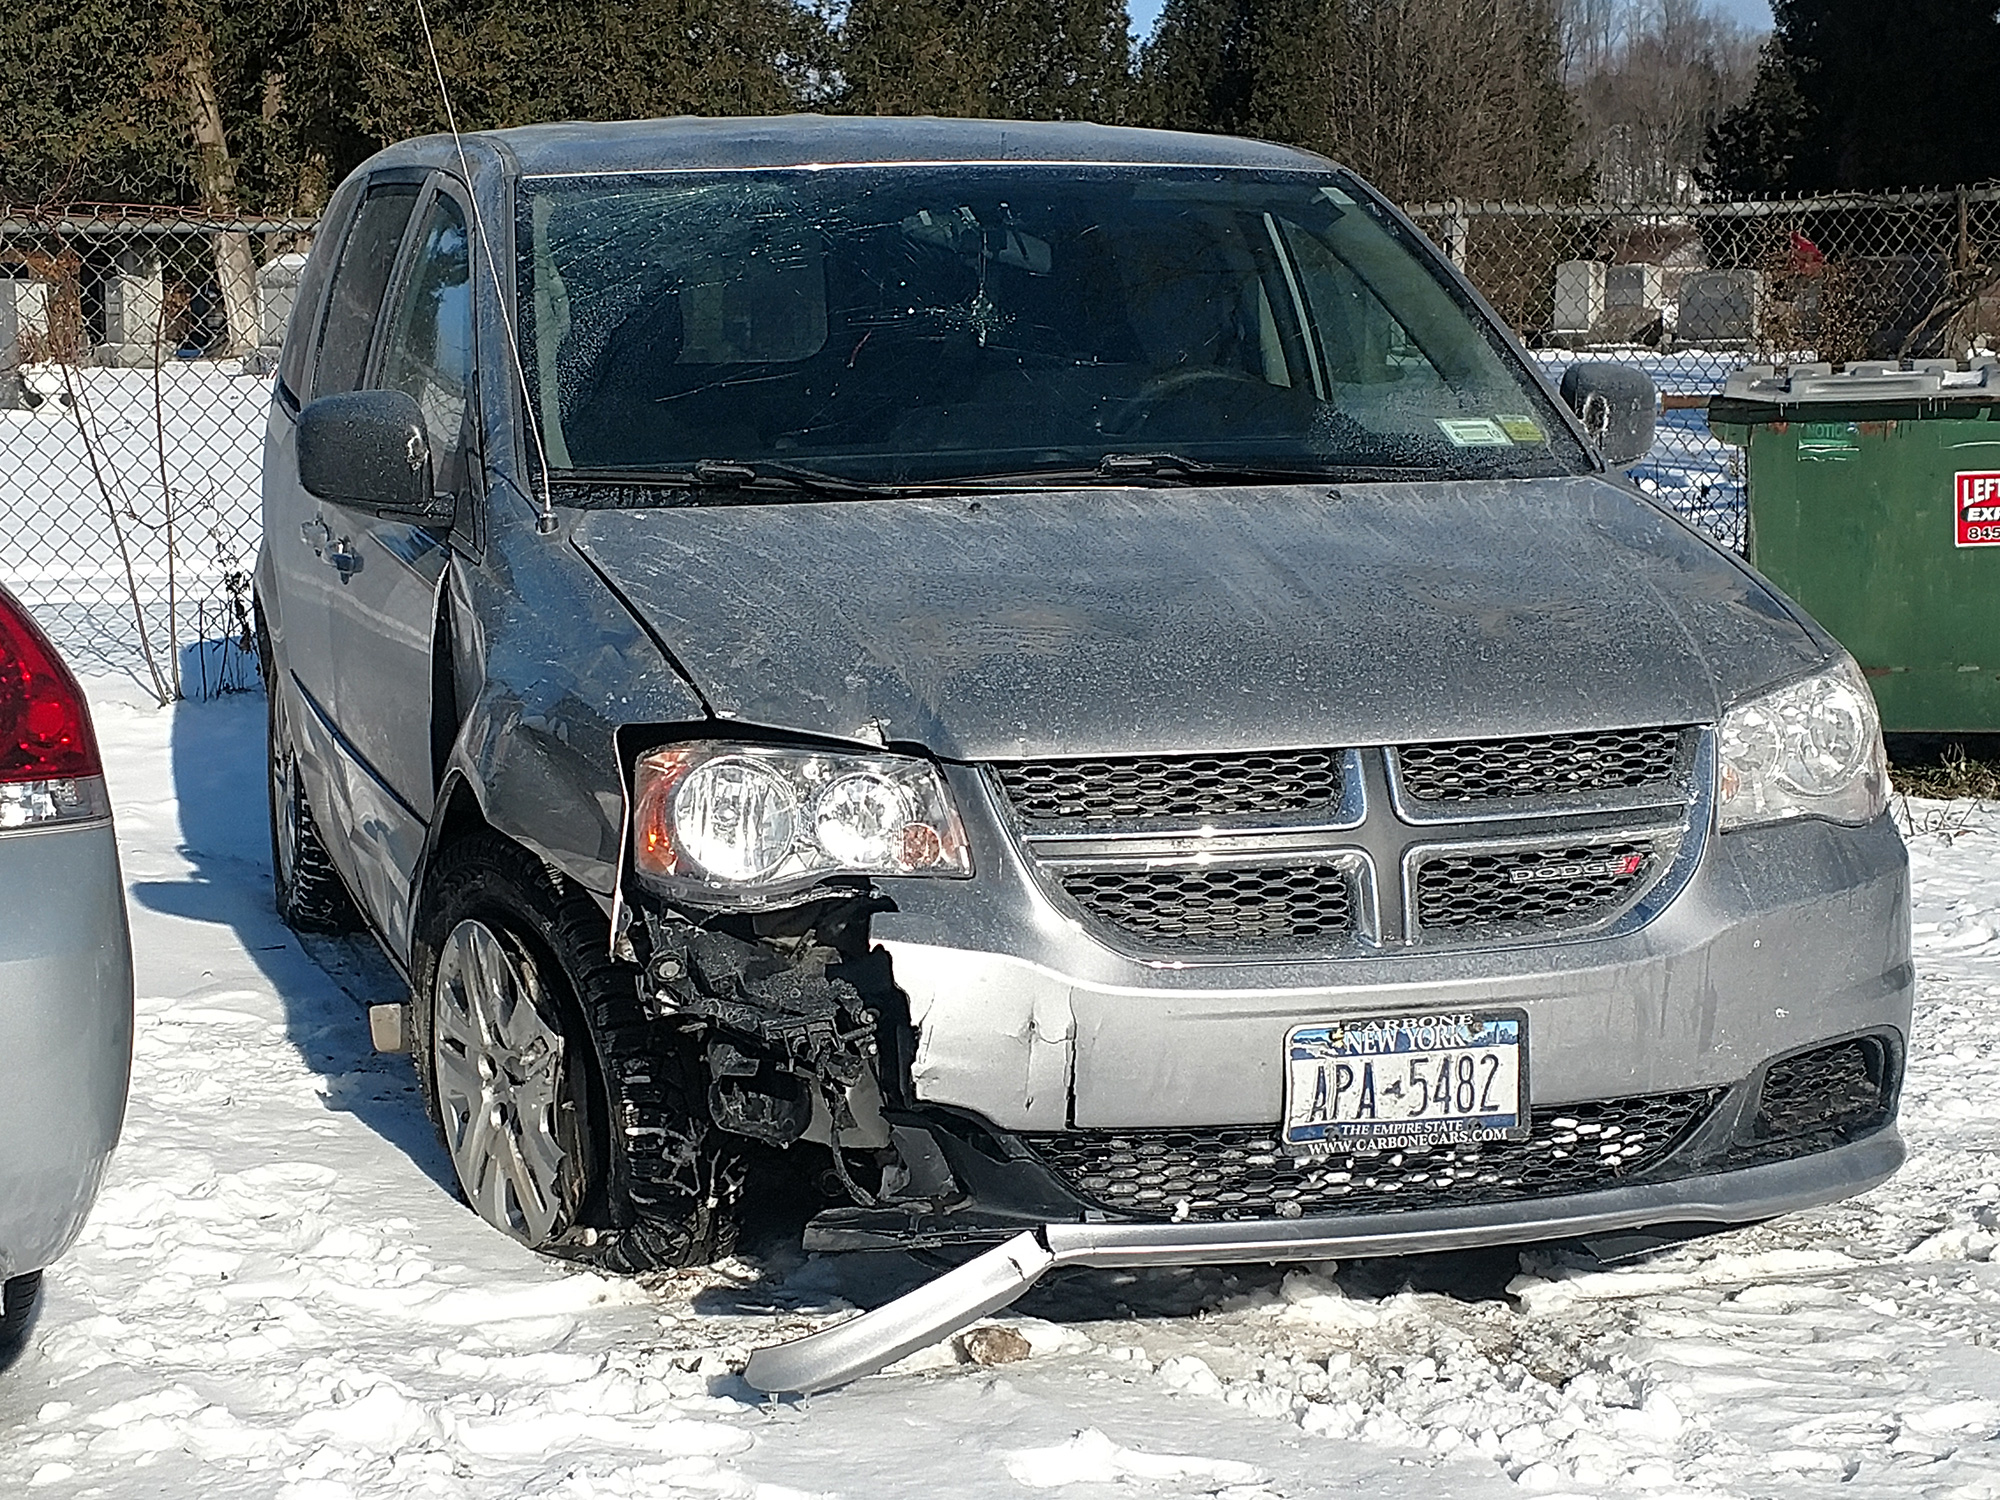 Car crashed in snow